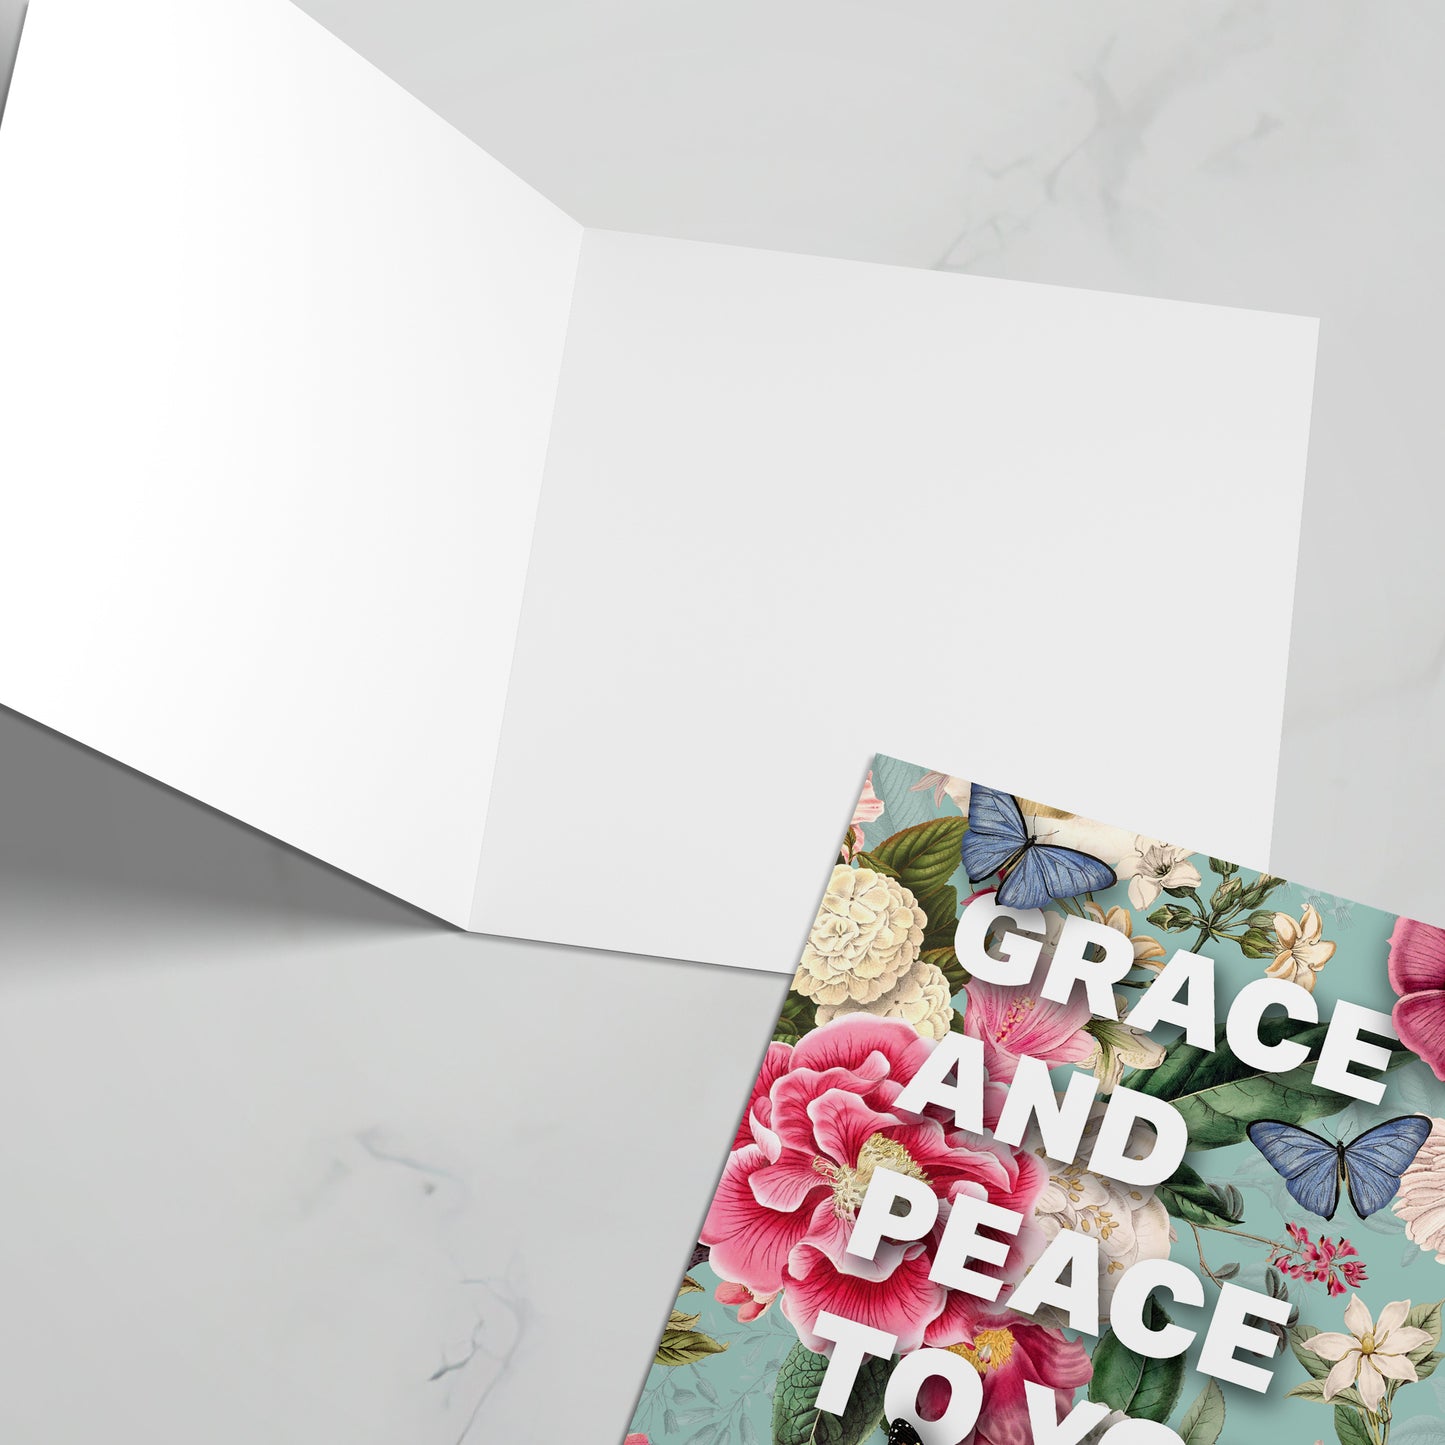 "Grace and Peace" Christian greeting card